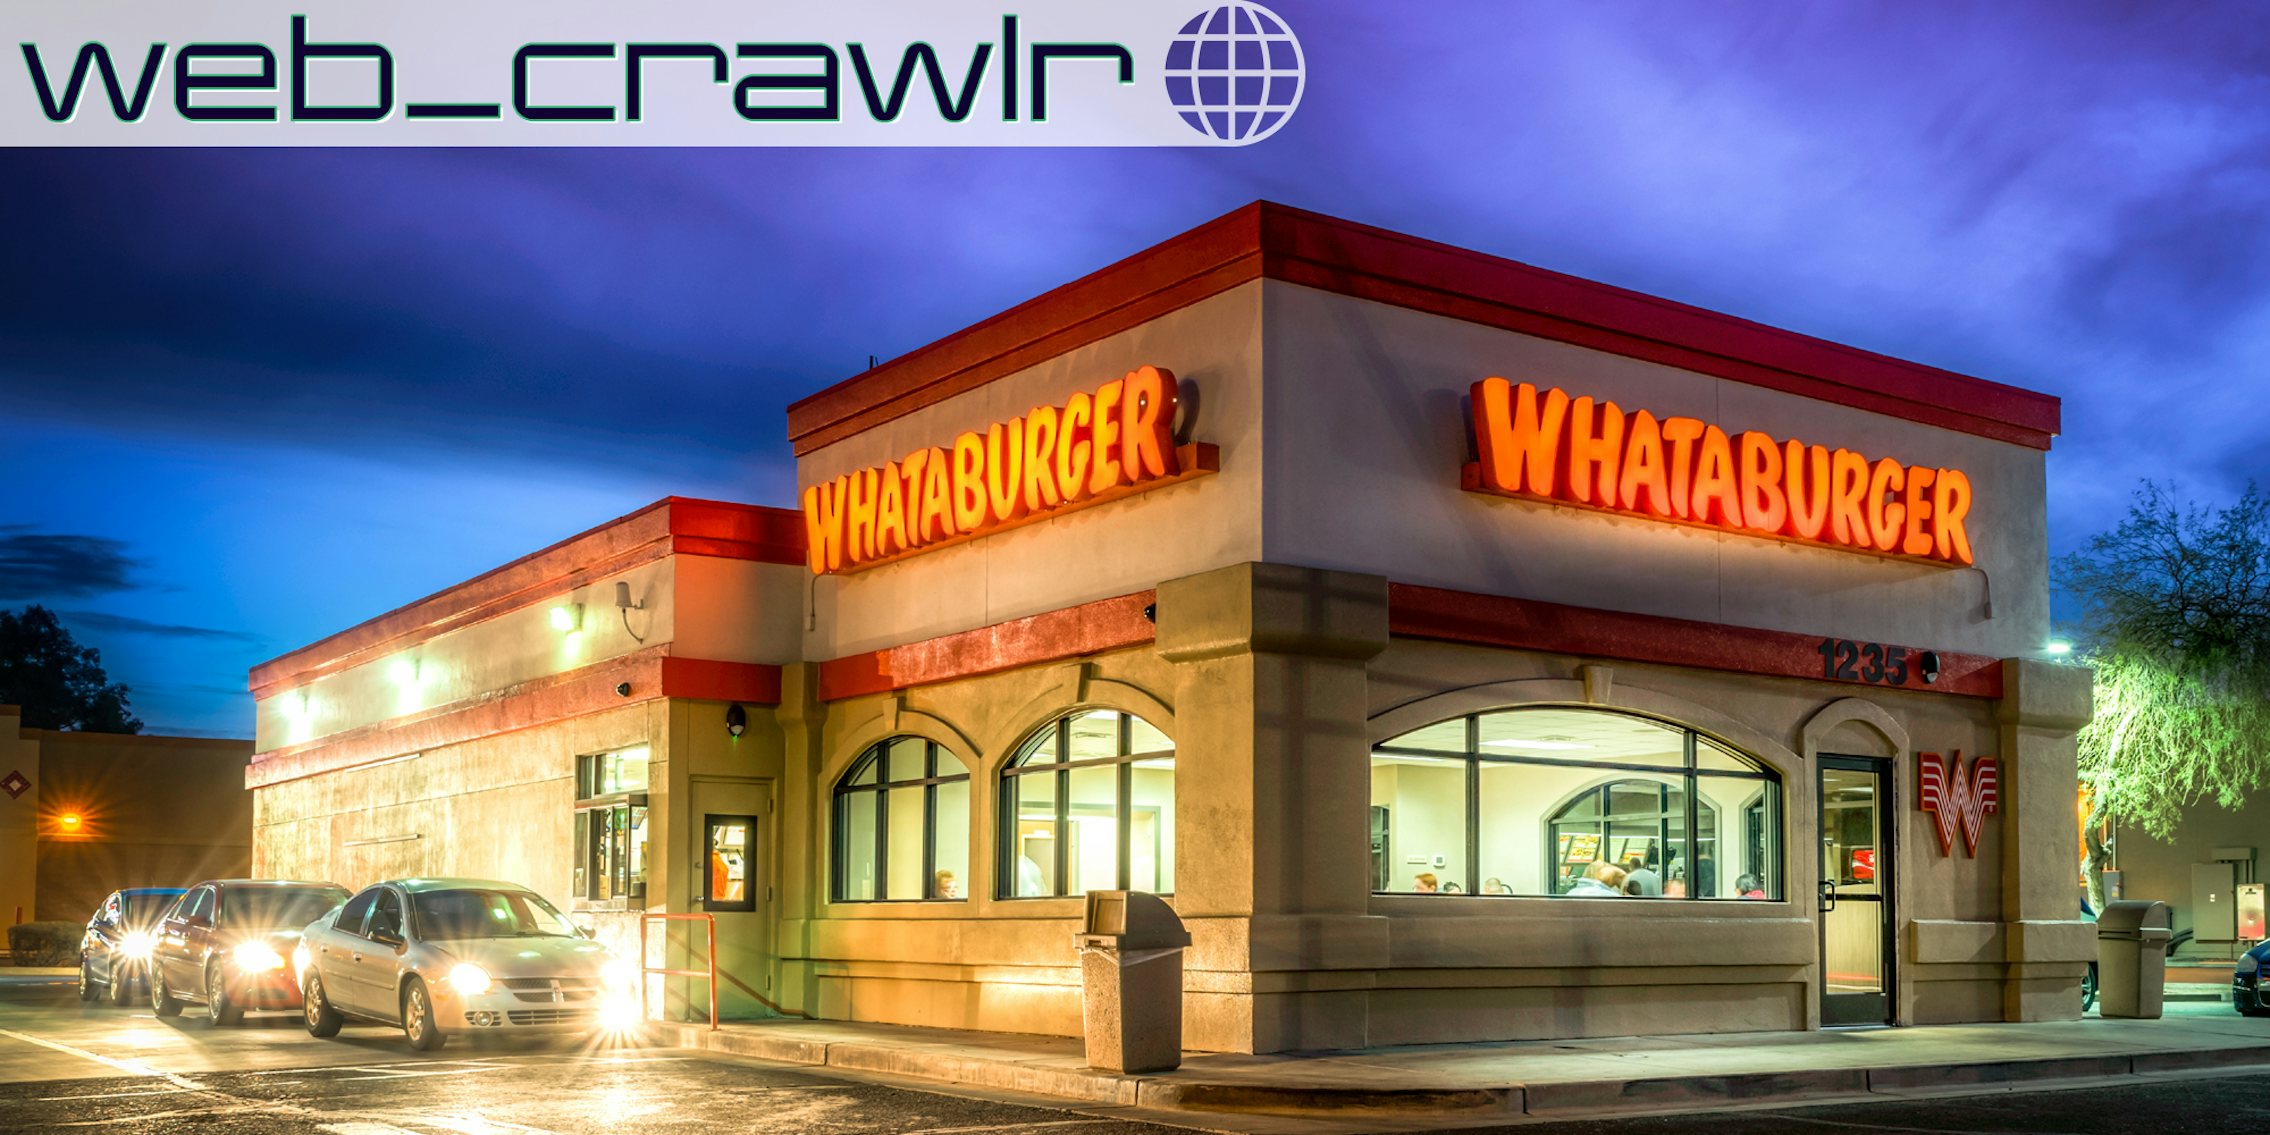 Cars going through a drive-thru at Whataburger at night. The Daily Dot newsletter web_crawlr logo is in the top left corner.